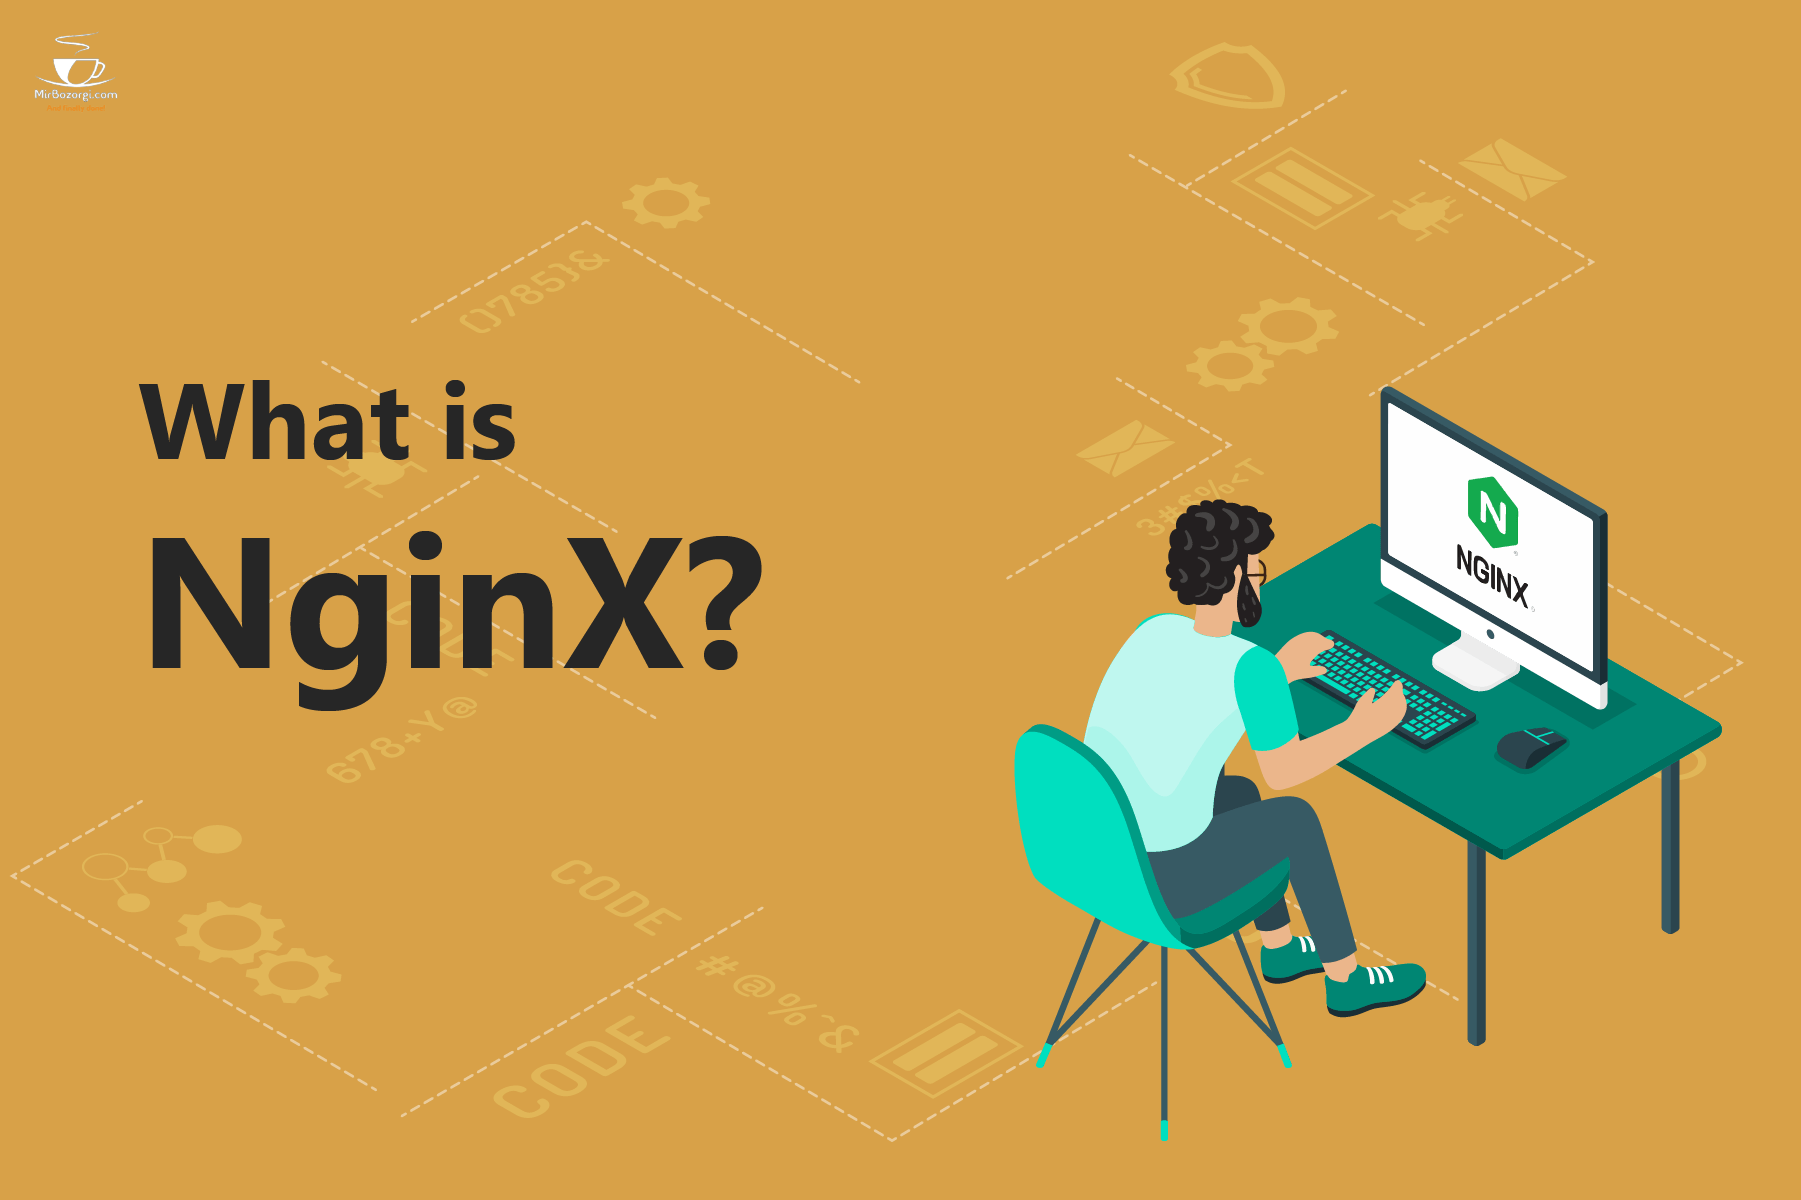 What is NginX?